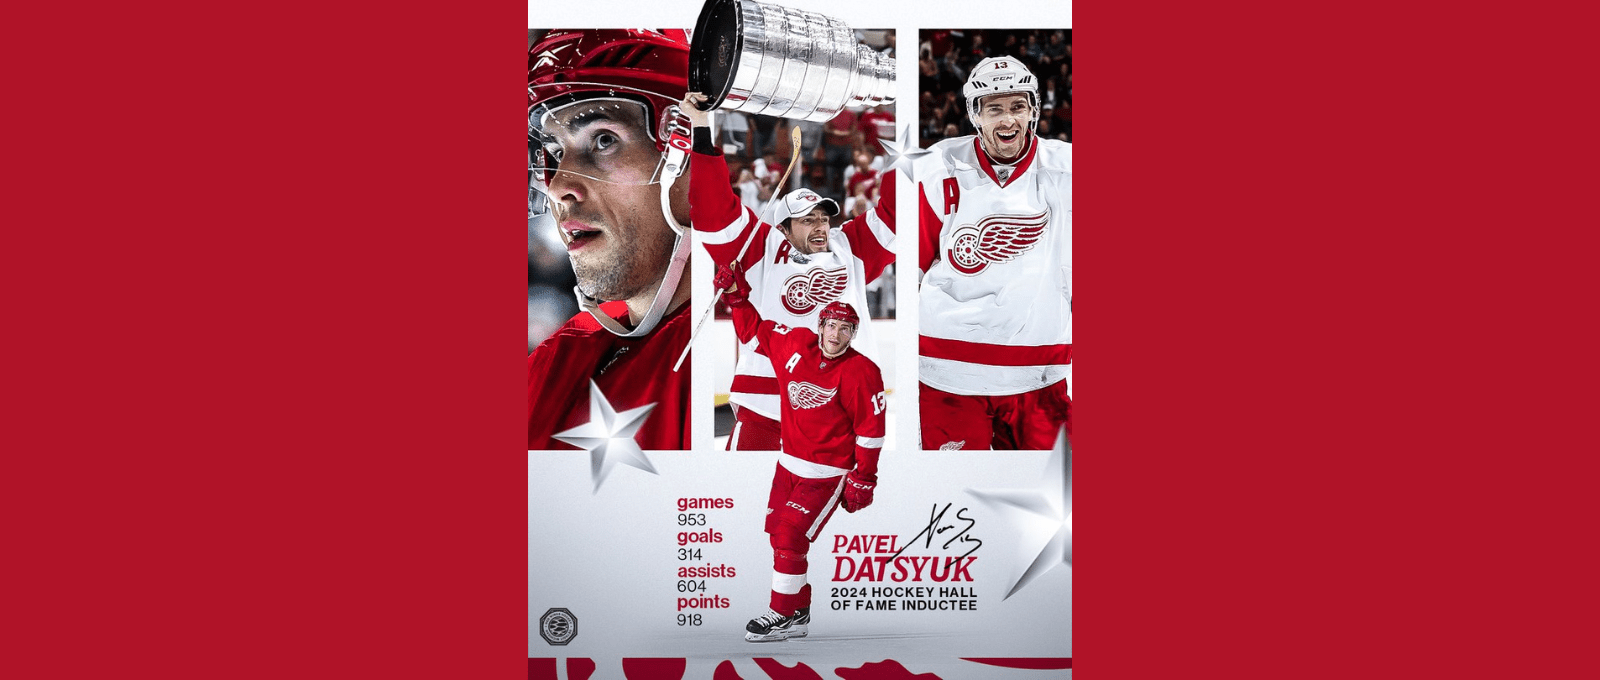 Pavel Datsyuk Elected to Hockey Hall of Fame Class of 2024